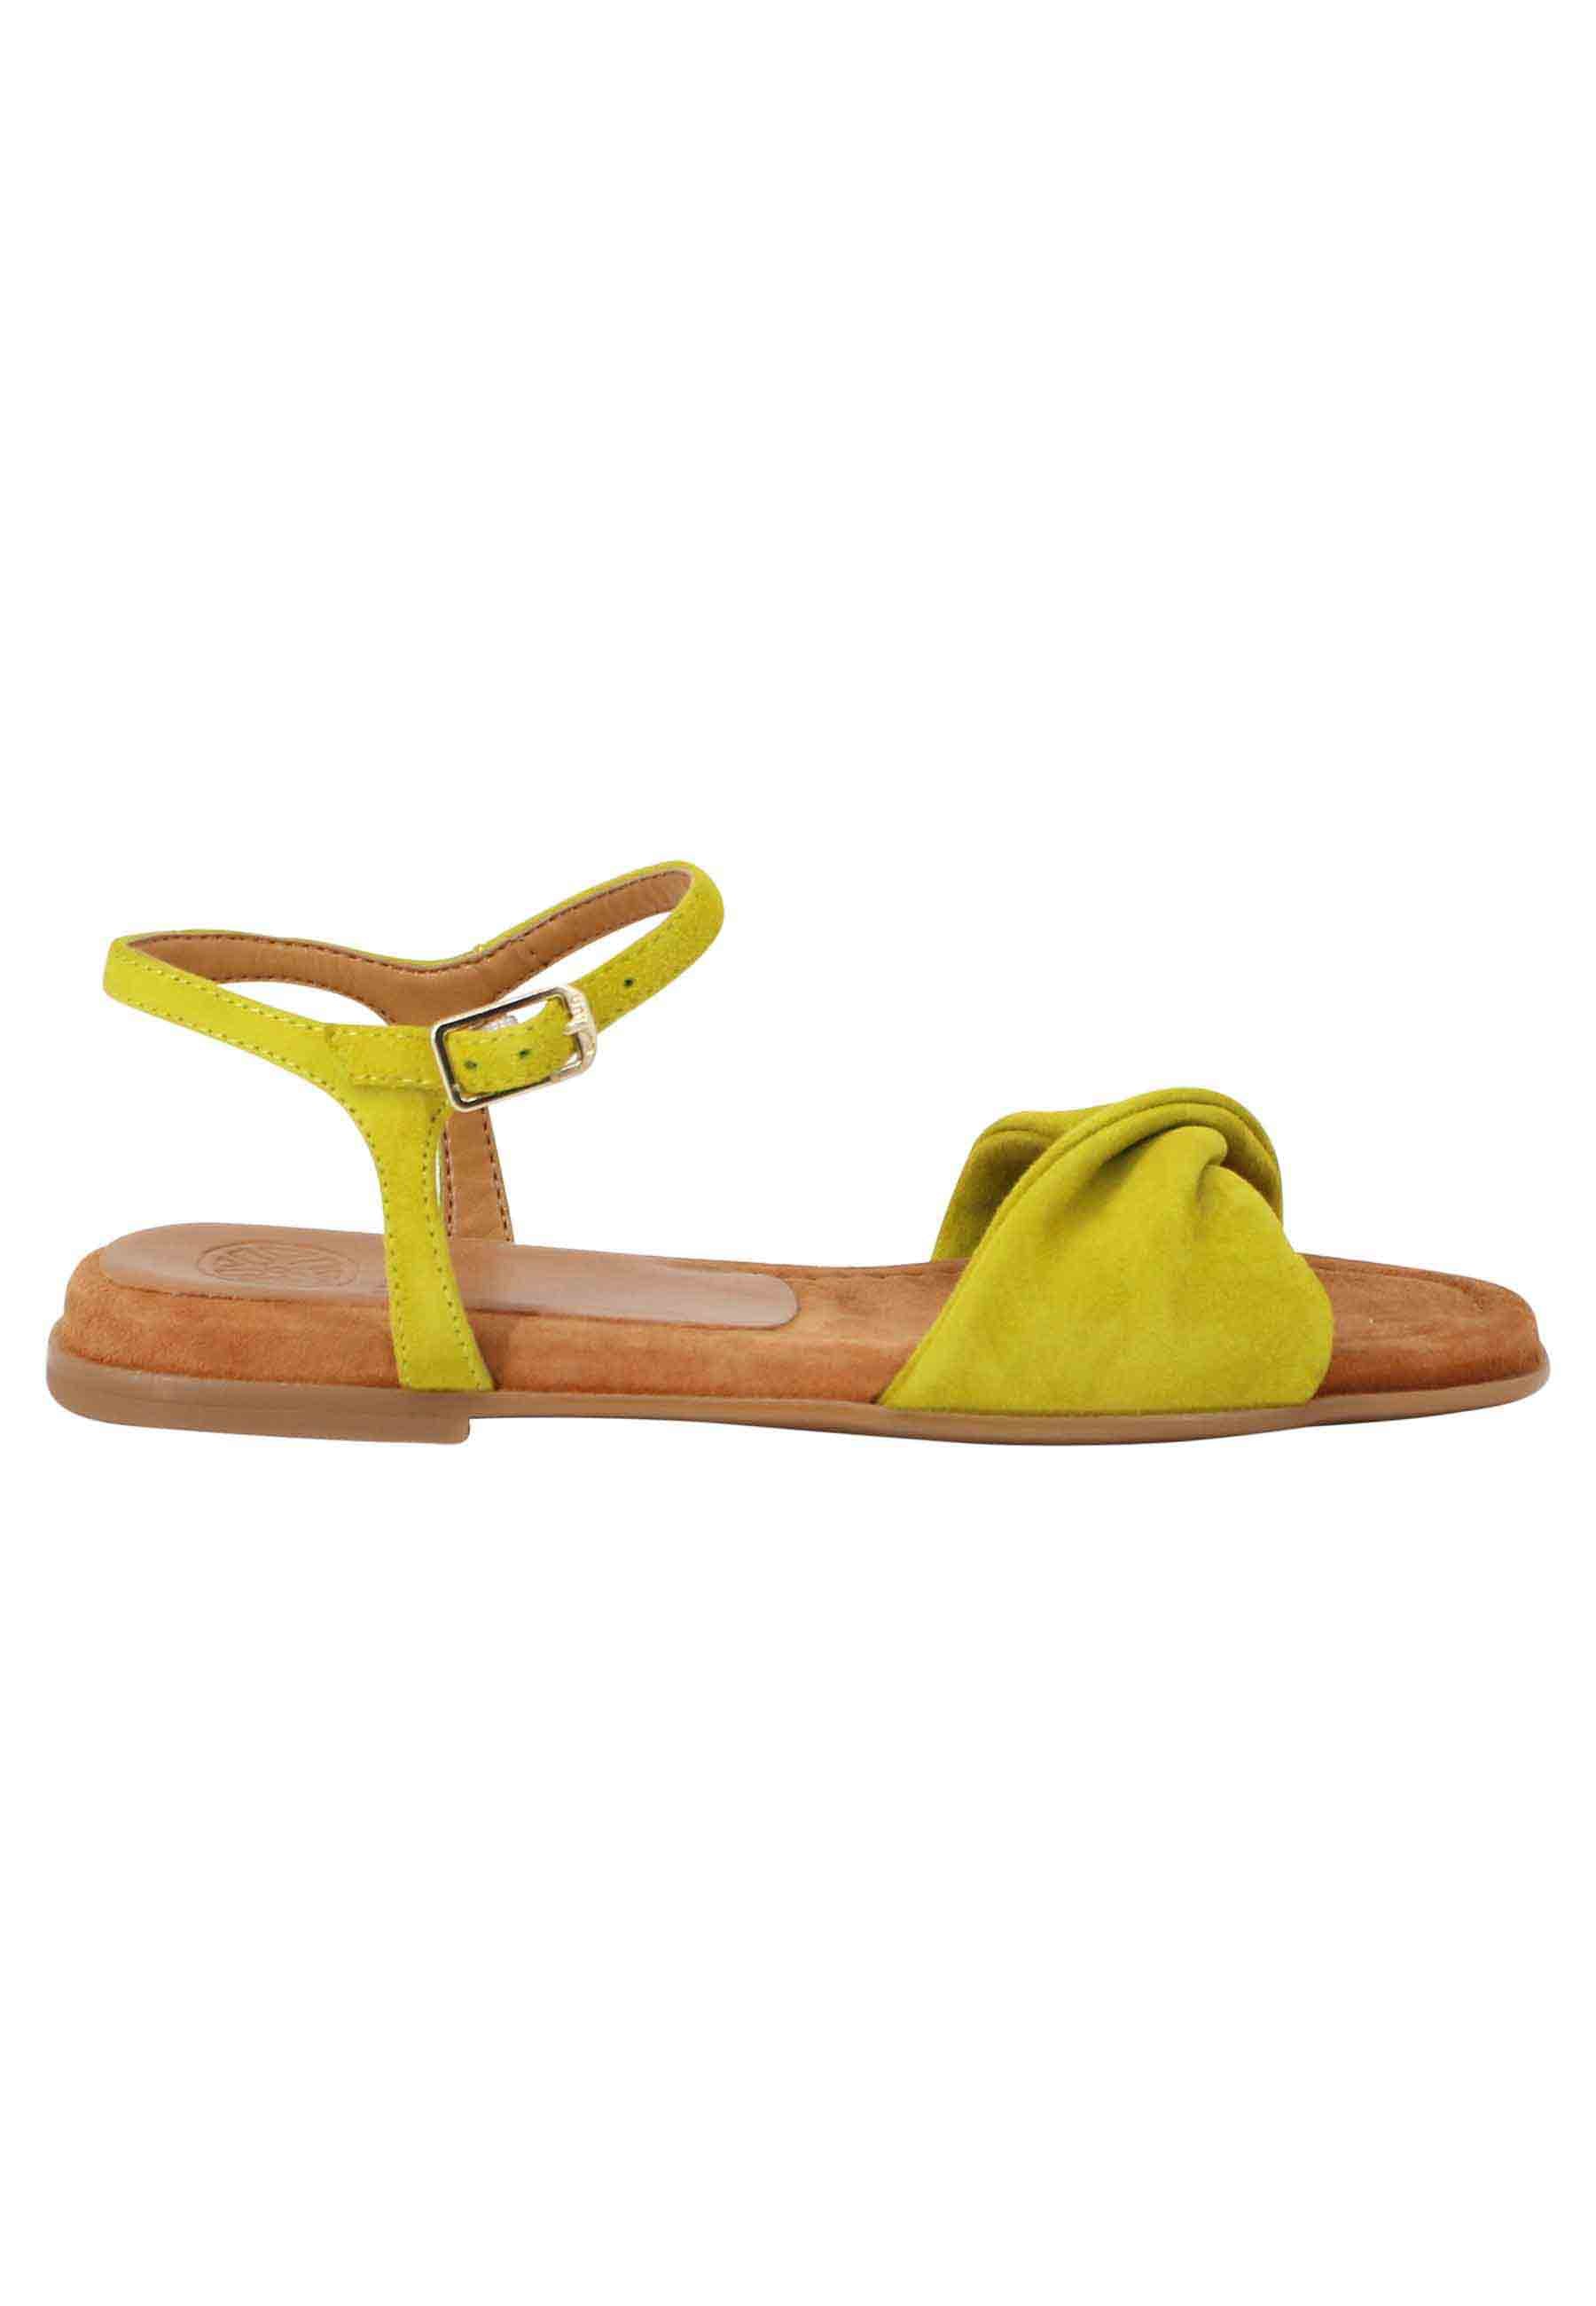 Women's flat sandals in green suede with strap and padded insole